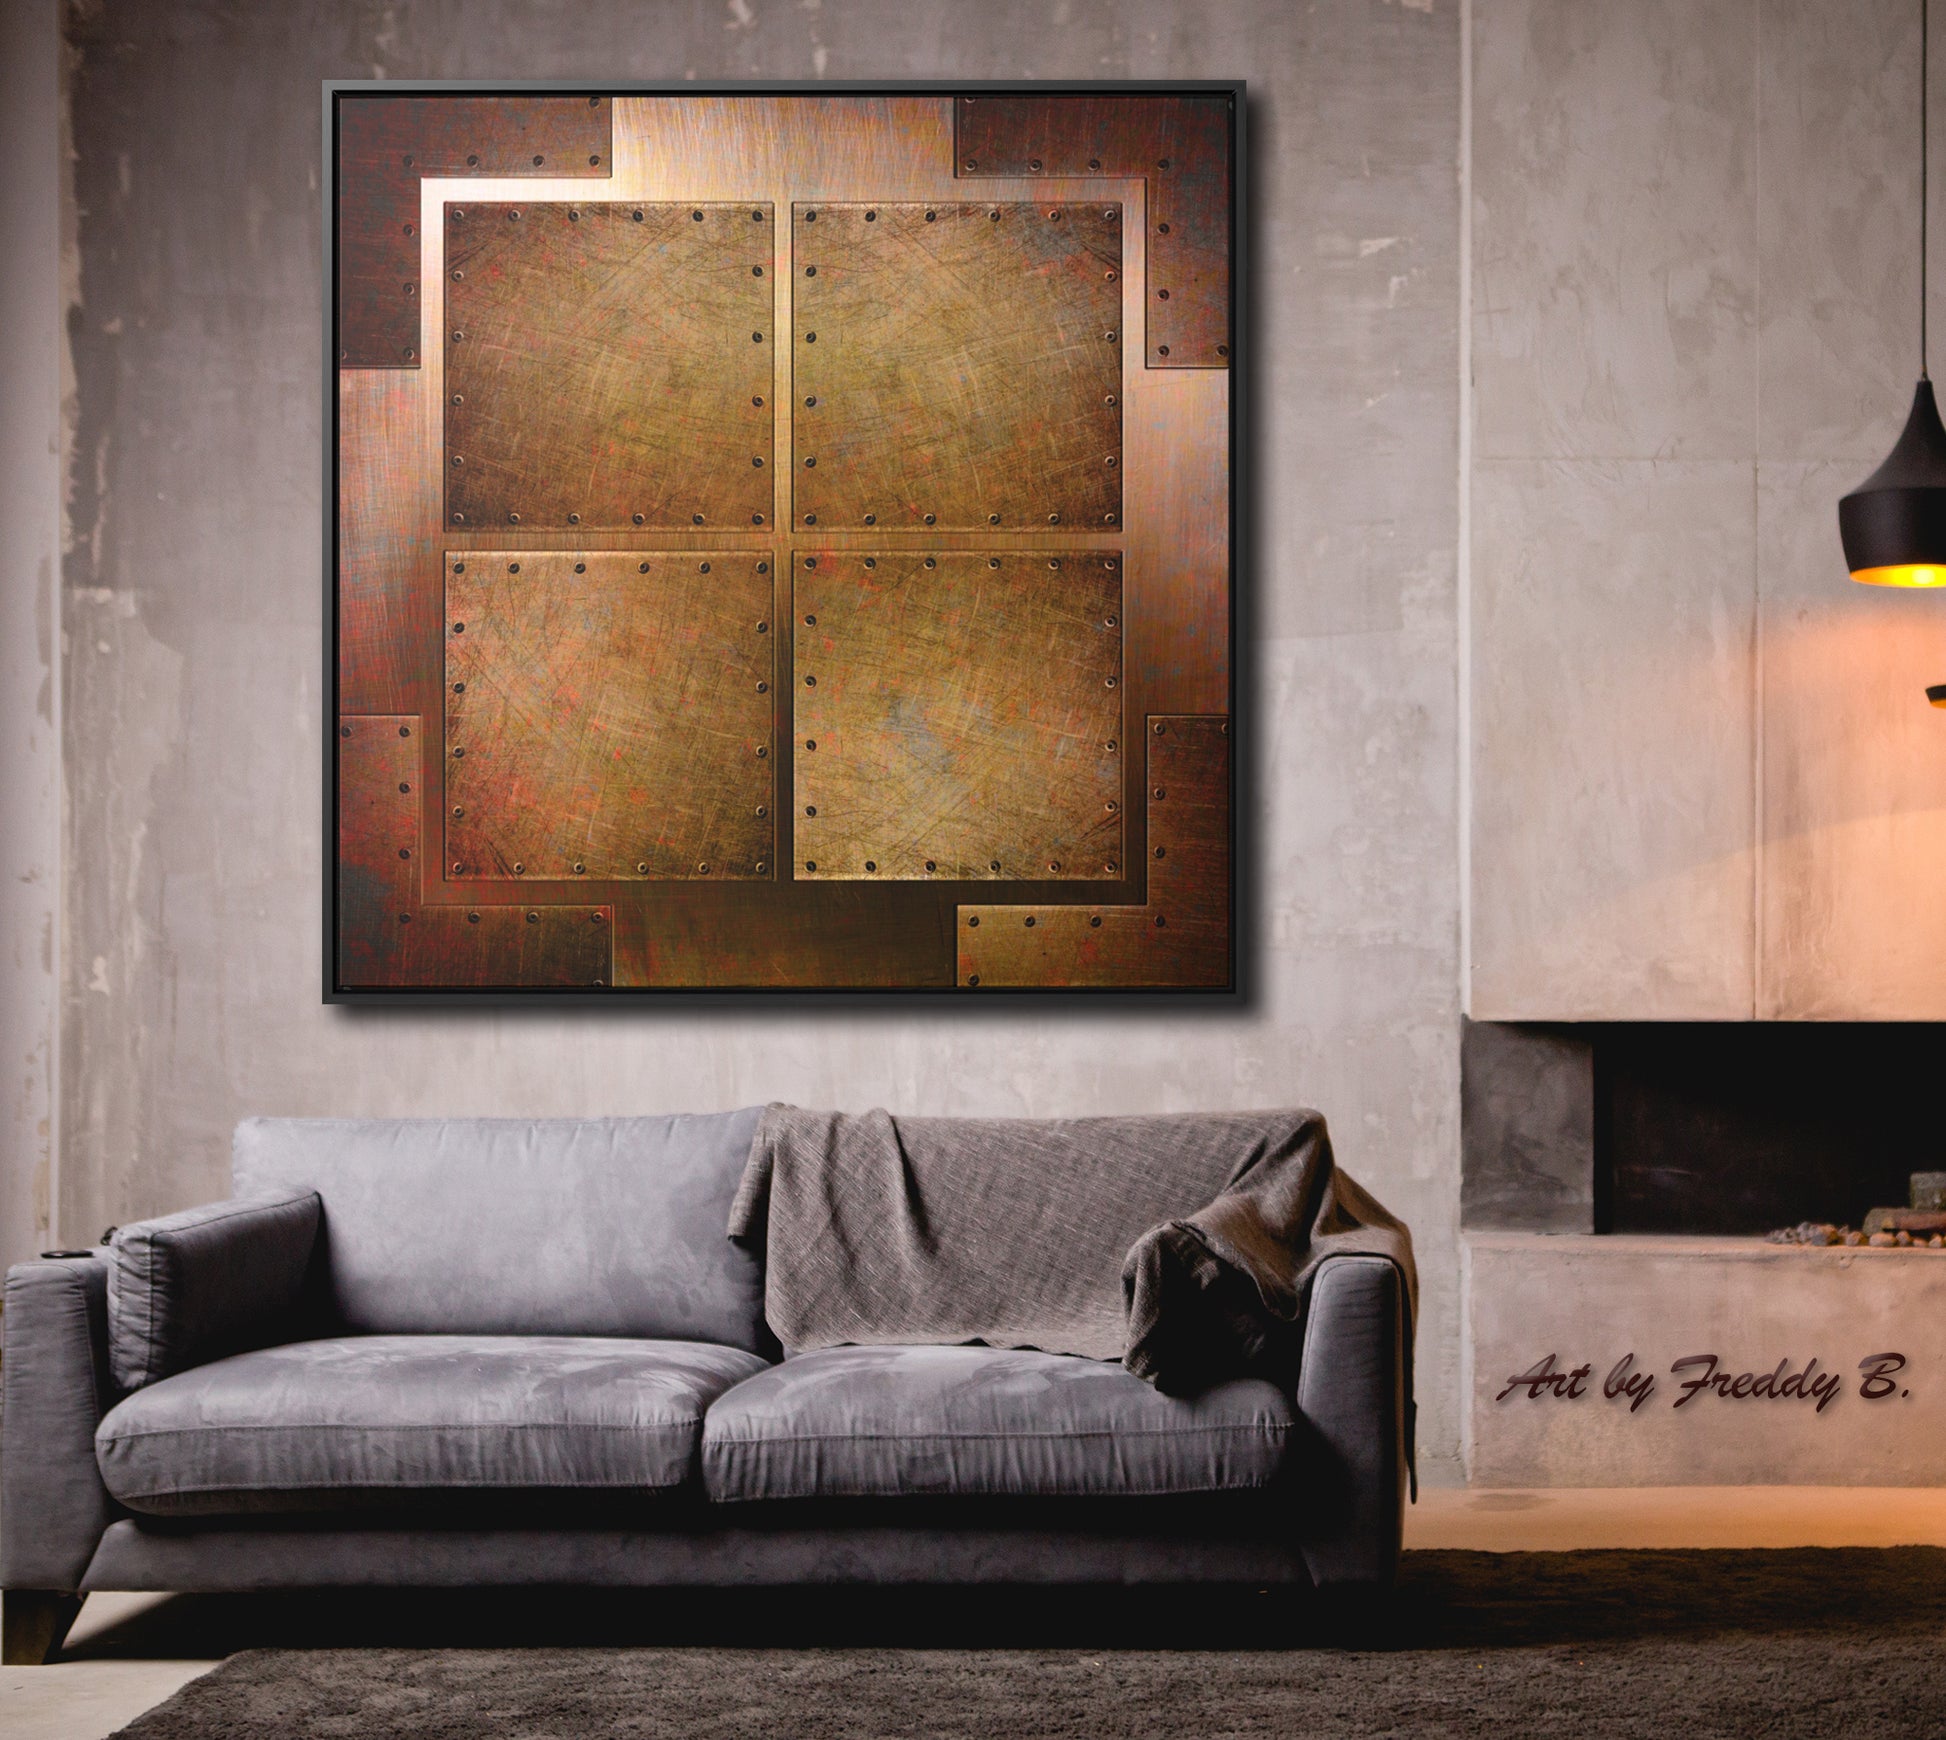 Steampunk Themed Framed Wall Art - Distressed, Riveted Copper Sheets Print on Canvas in a Floating Frame hung by fireplace